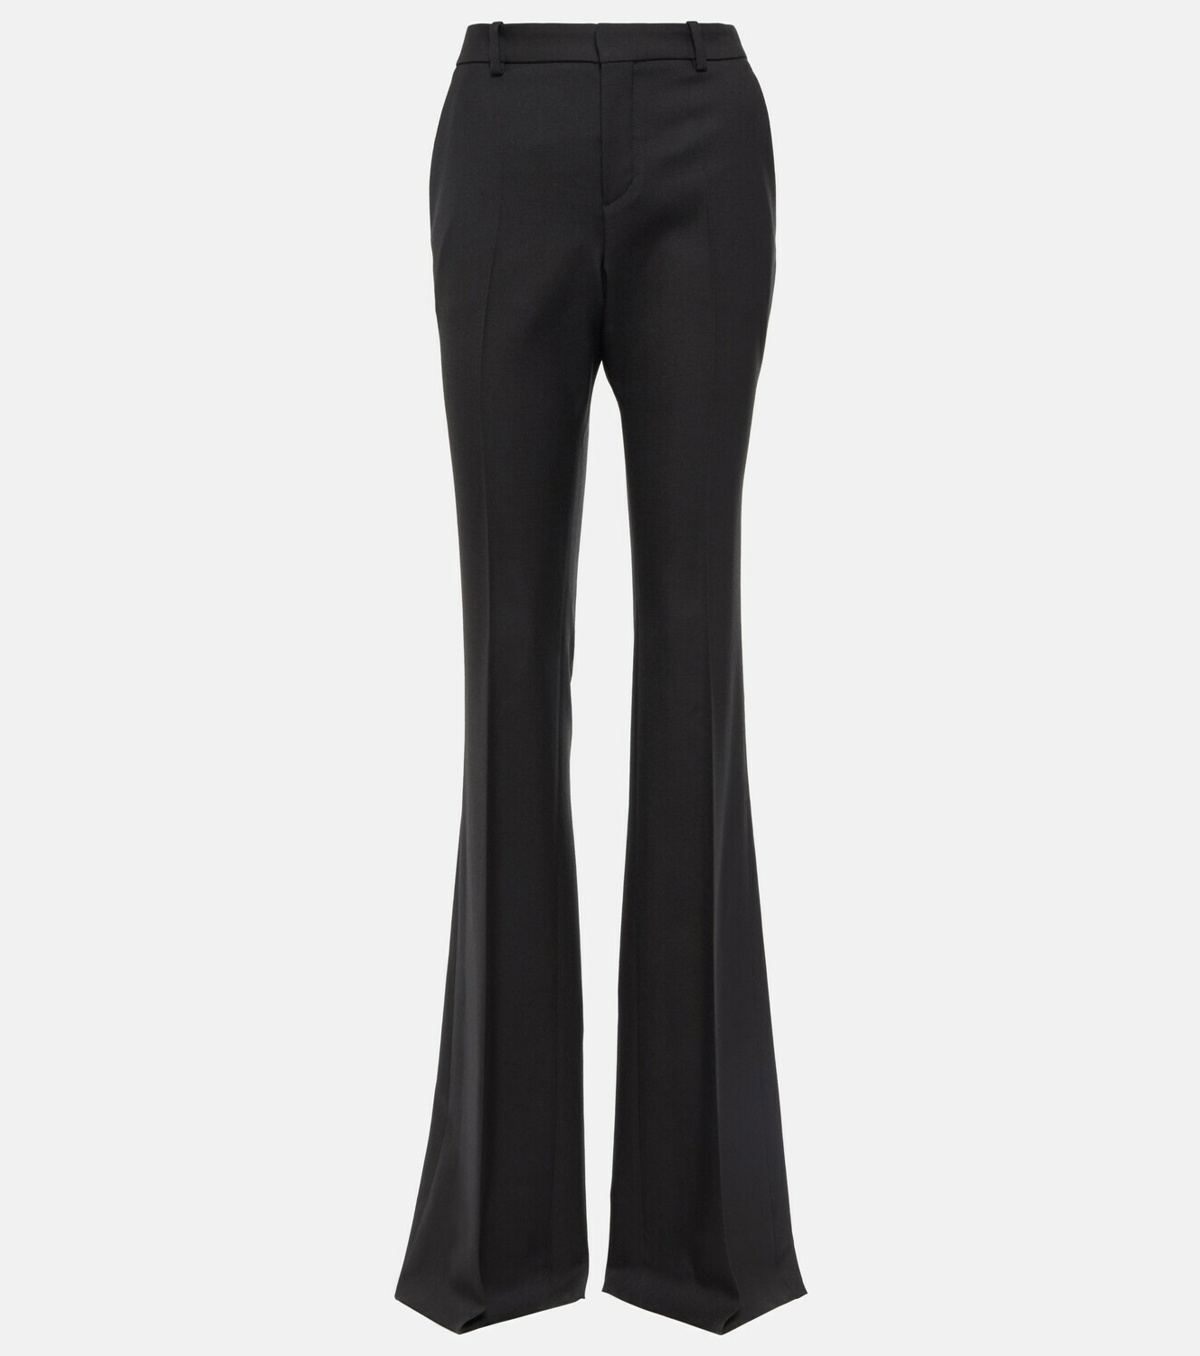 Cutout jersey flared pants in black - The Attico